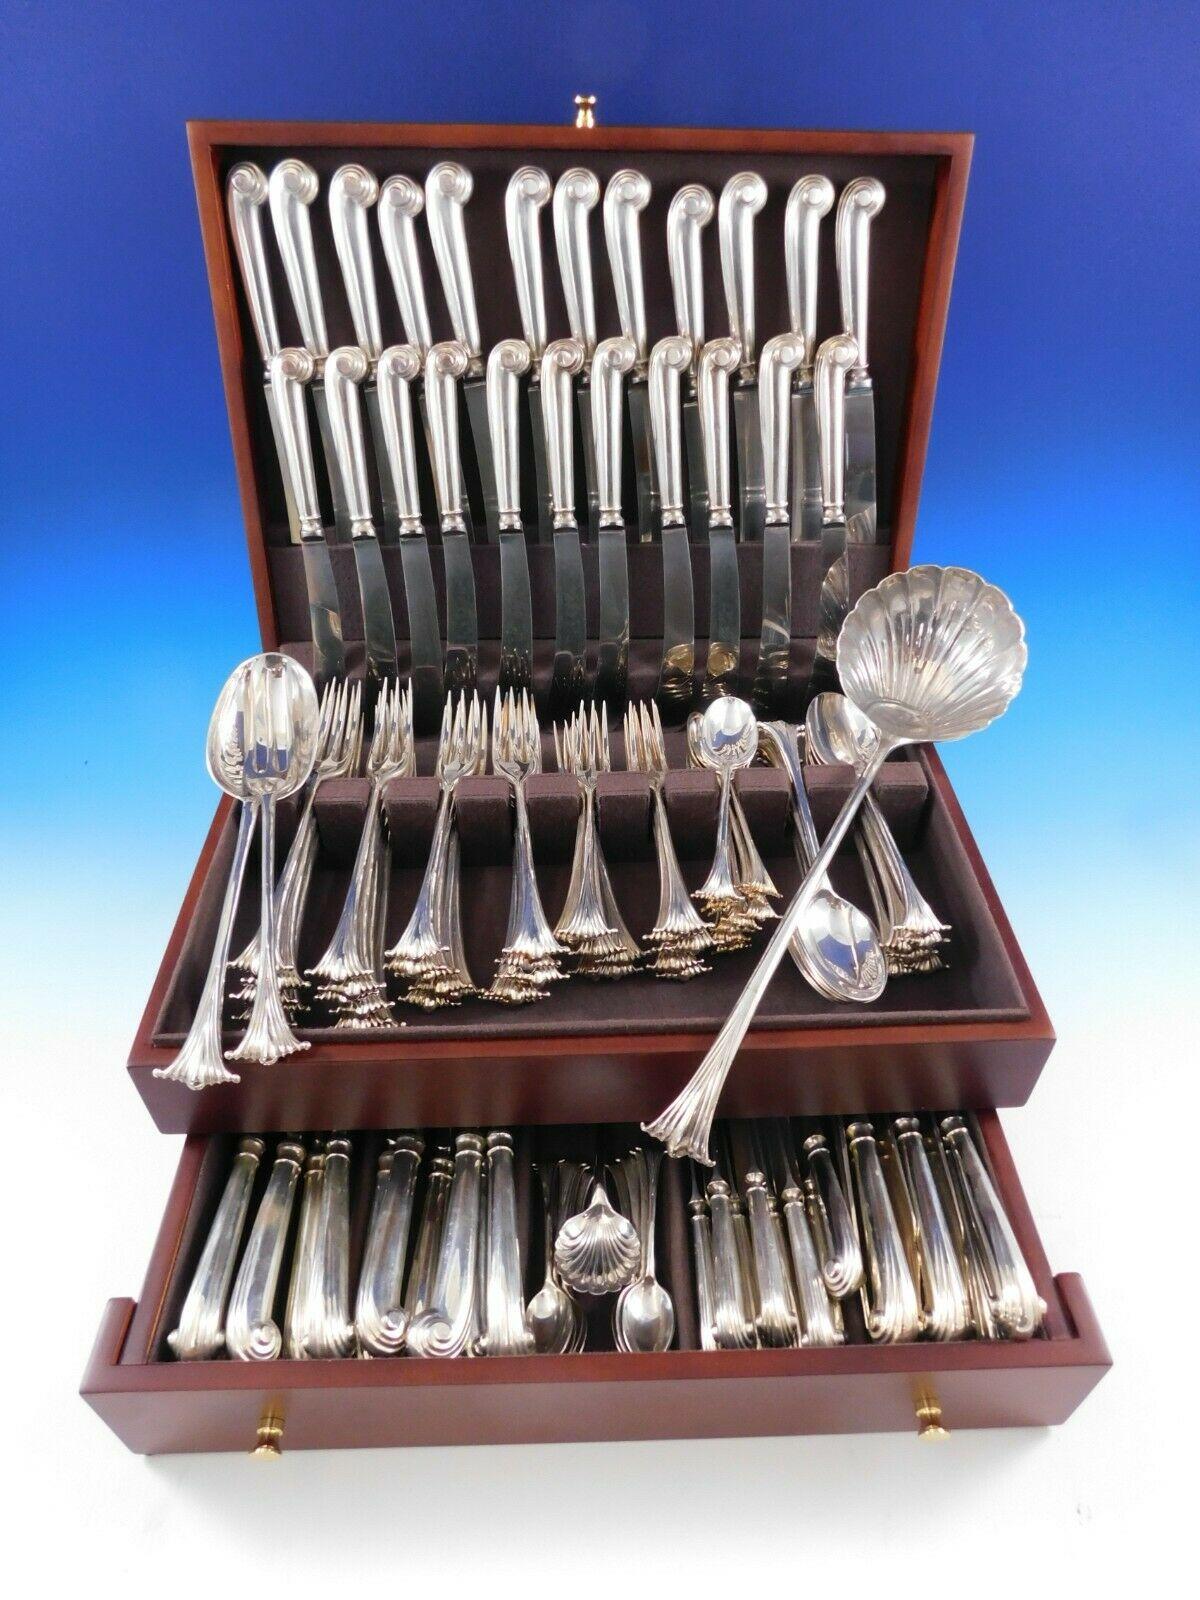 ONLSOW BY JAMES ROBINSON

For 70 years, James Robinson has been selling exquisite handmade sterling silver flatware in Sheffield, England. Today, the silver is still made in the traditional way. They start with a rectangular strip of silver, then